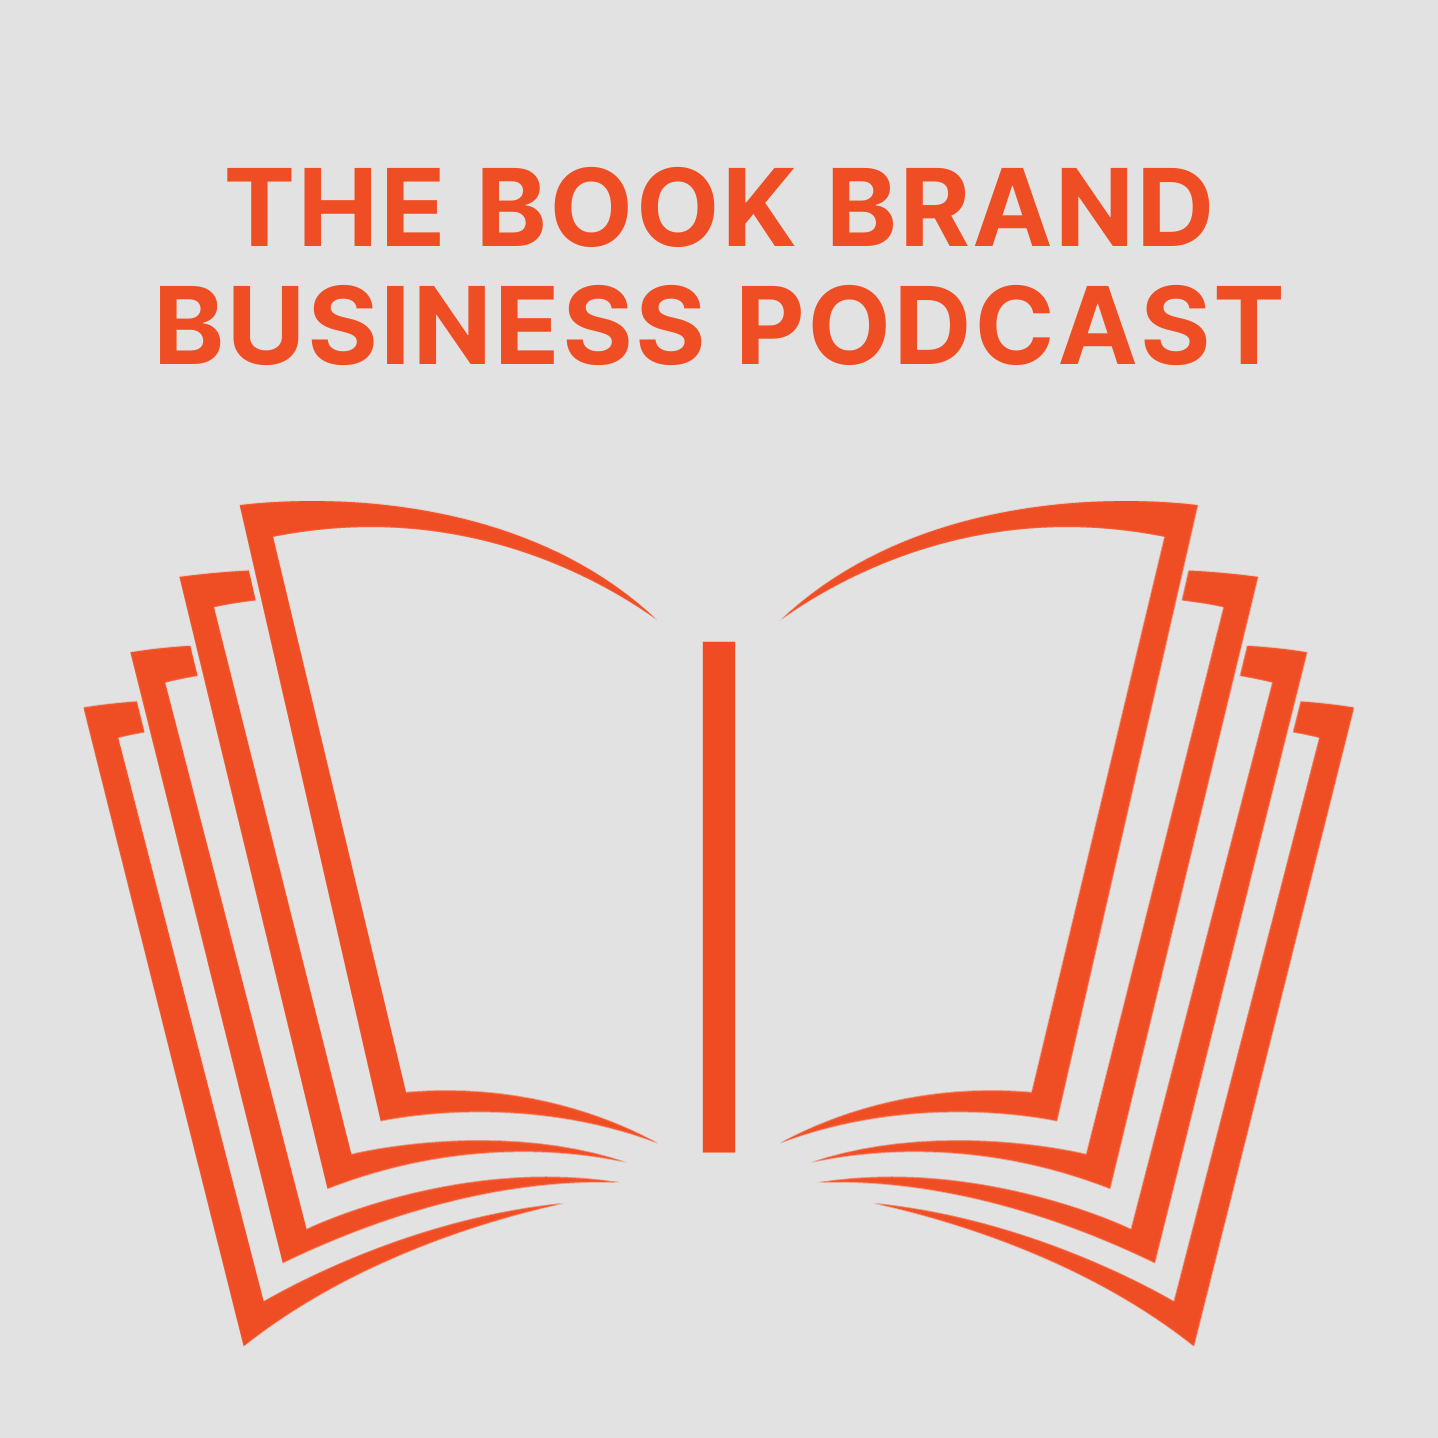 The Book Brand Business Podcast's artwork